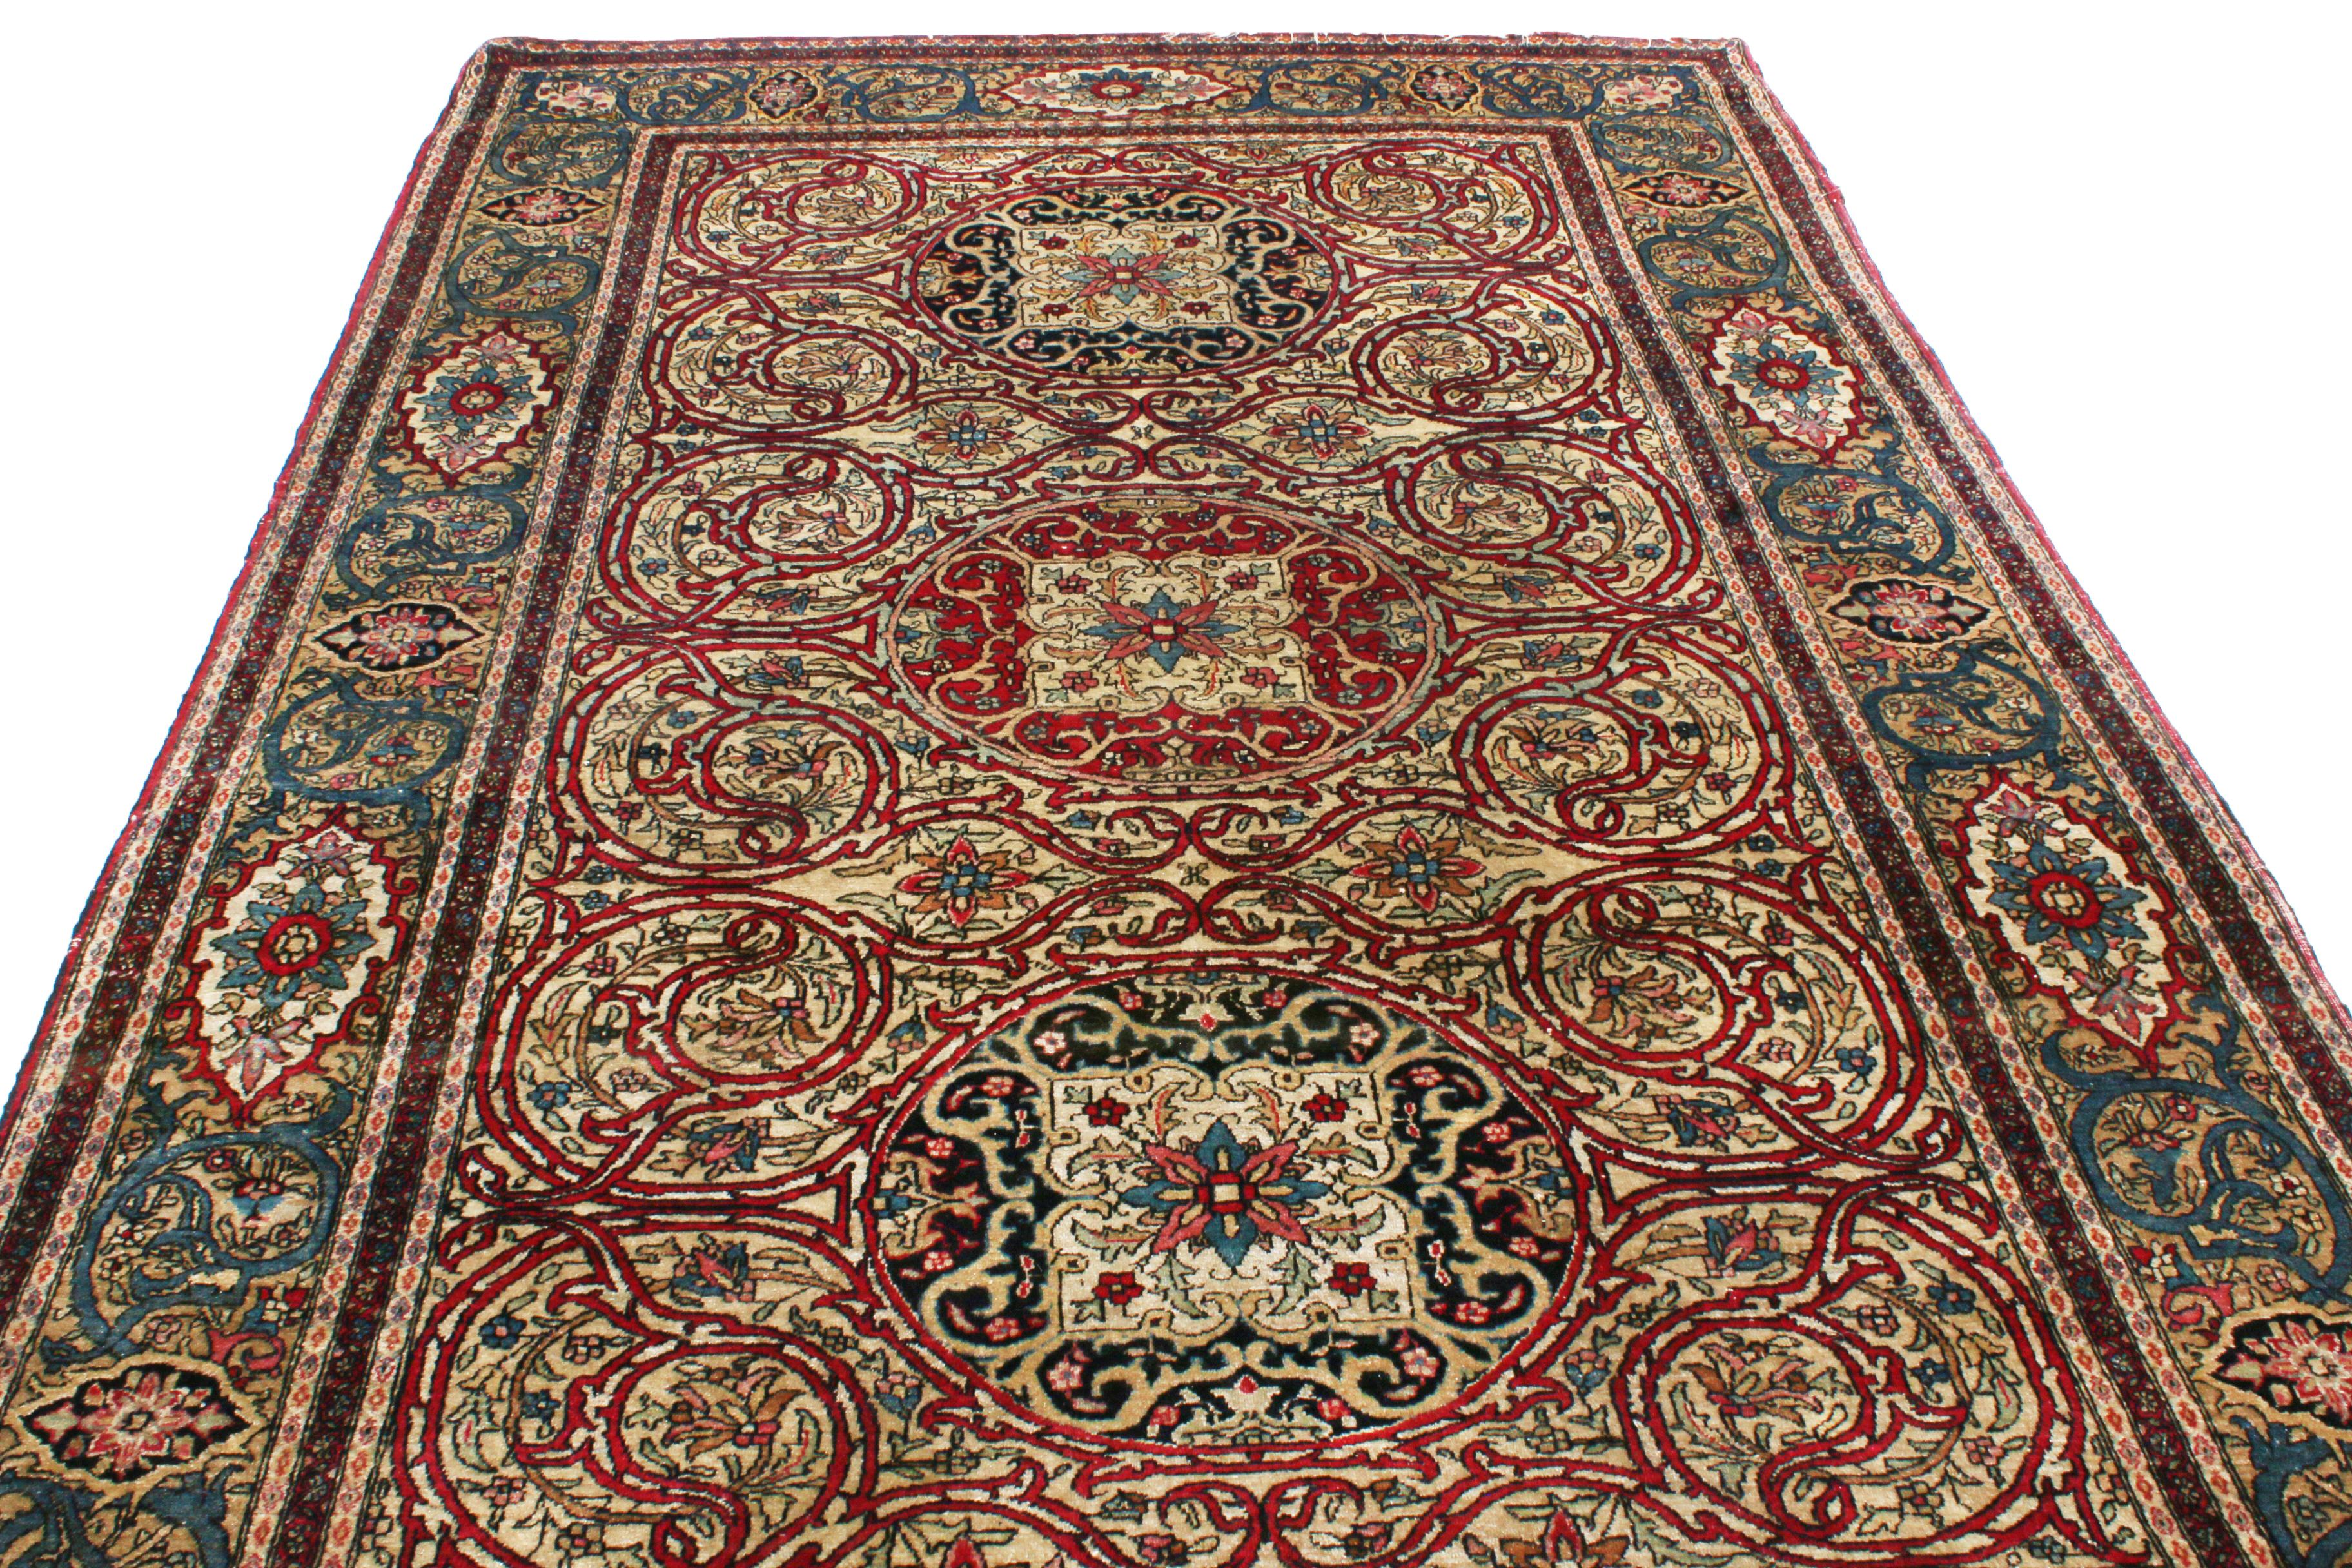 Originating from Persia between 1890-1910, this hand knotted Isfahan piece enjoys one of the most unique interpretations of the Islimi vine scroll of any Persian rug, lending a unique dimensionality to the field with the richest burgundy colourways